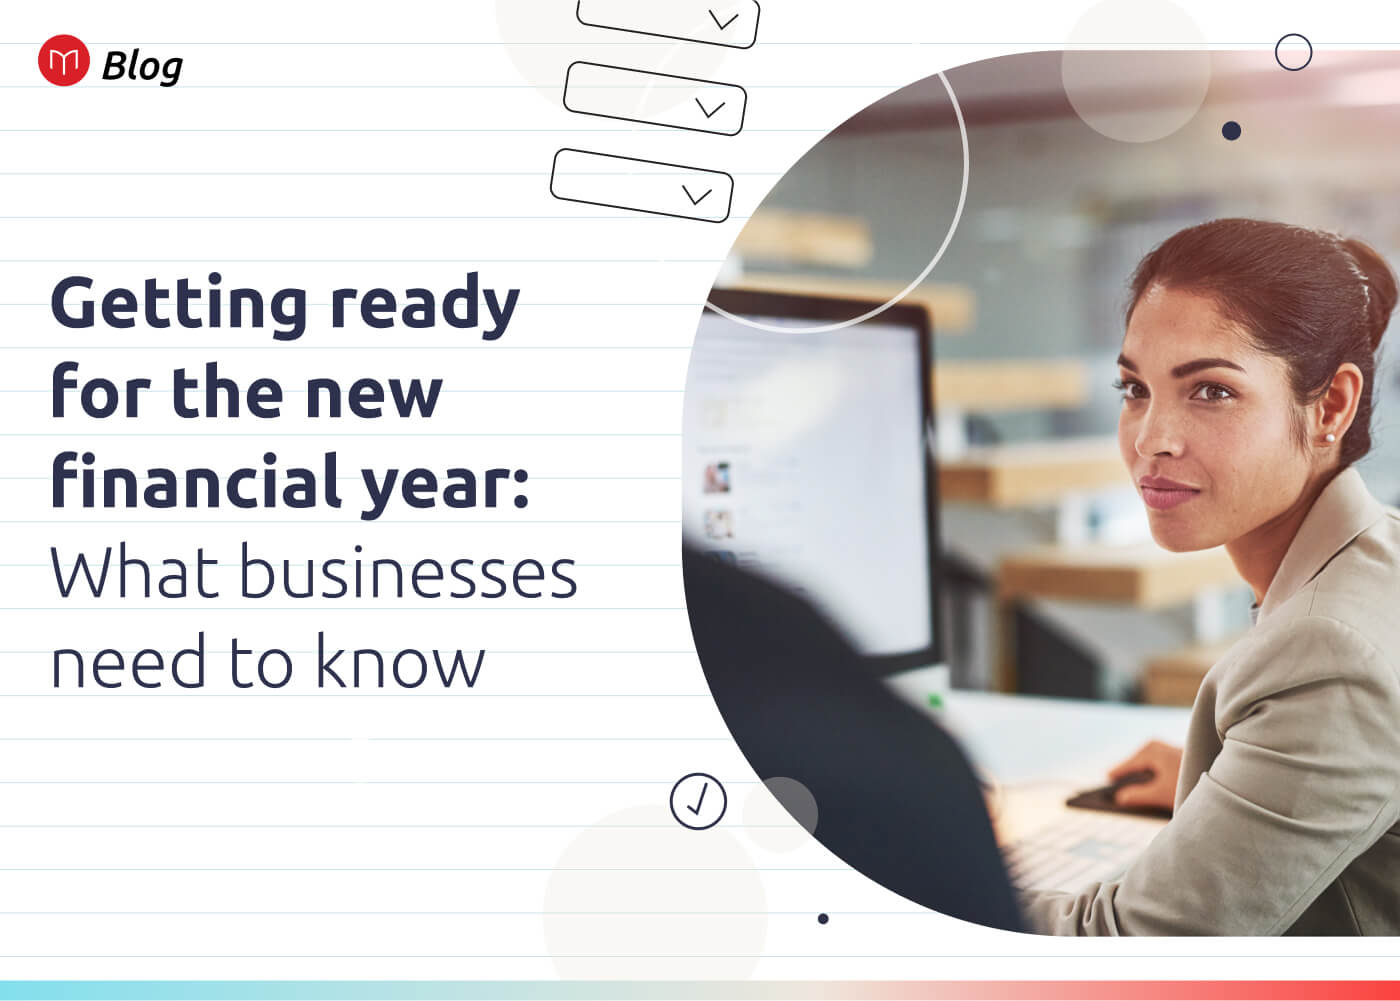 Getting ready for the New Financial Year: What Businesses Need to Know